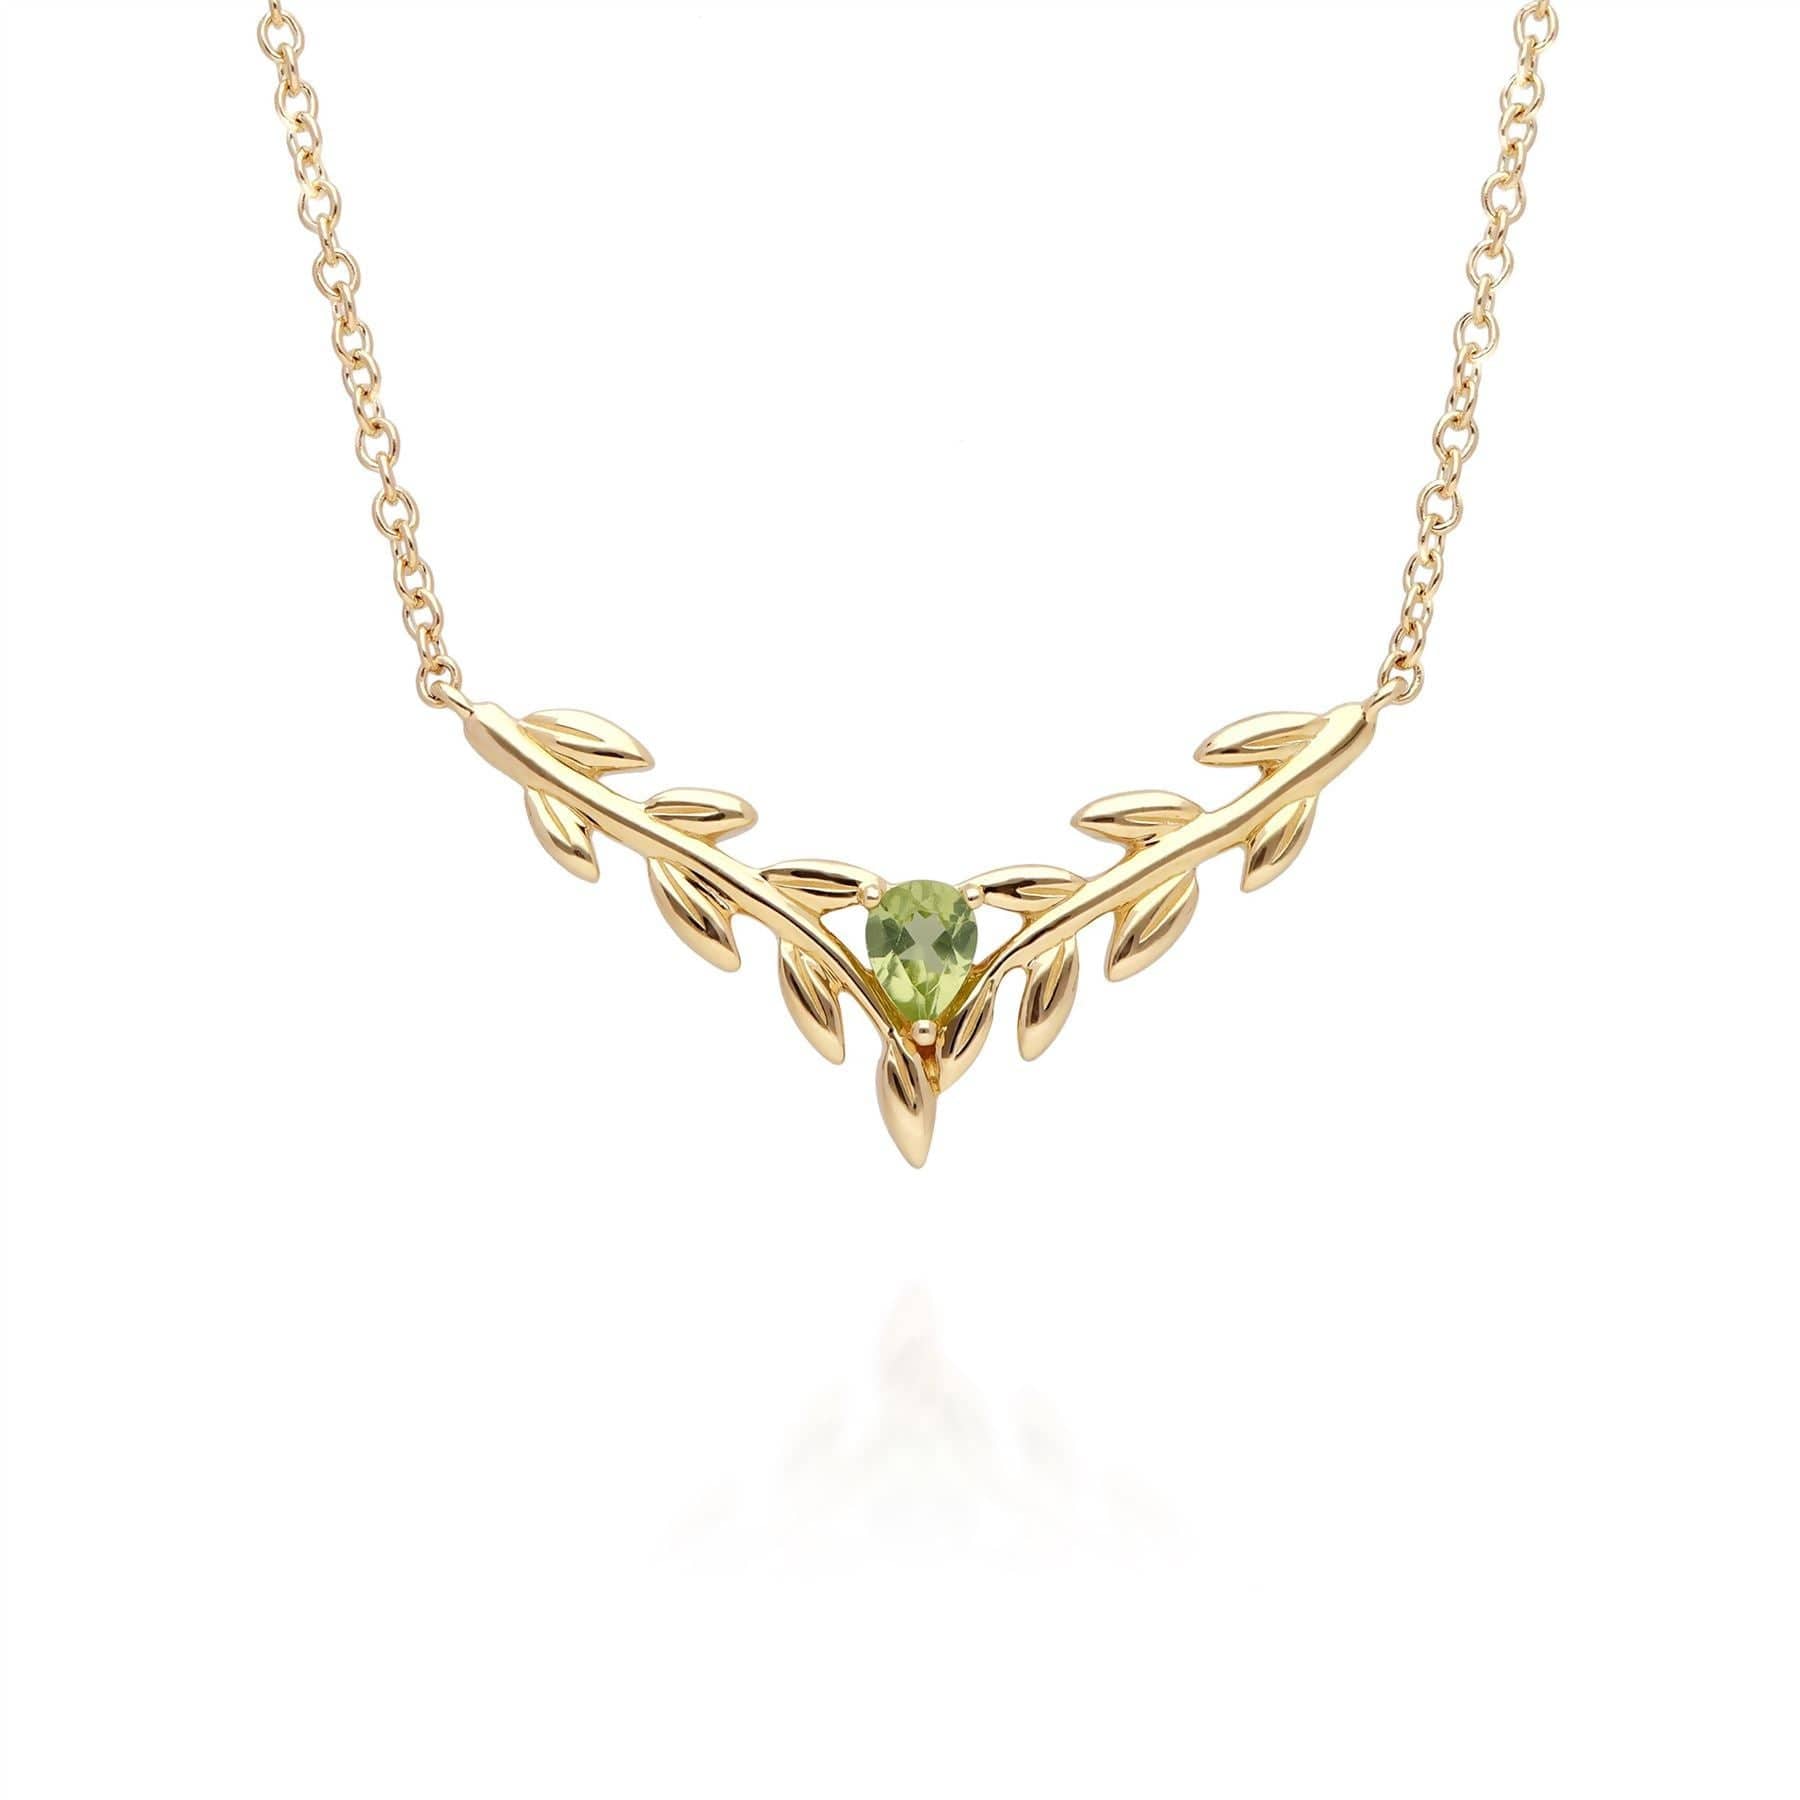 O Leaf Peridot Necklace & Ring Set in 9ct Yellow Gold - Gemondo